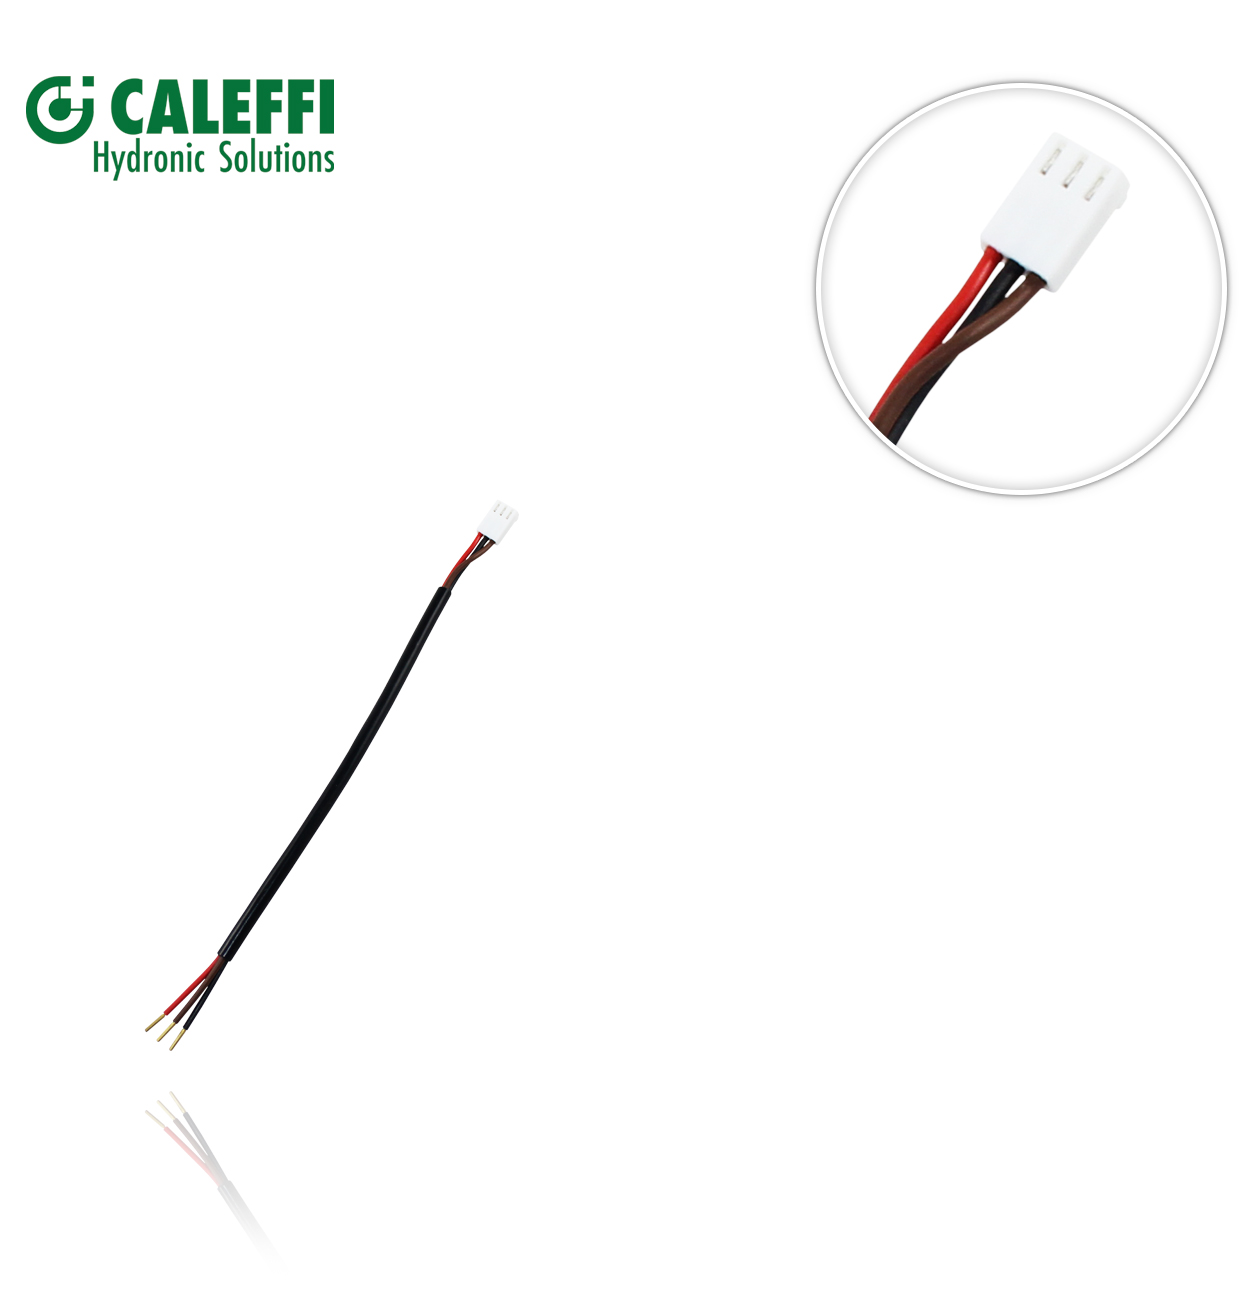 CABLE for CALEFFI-FERROLI ROTARY FLOW SWITCHES